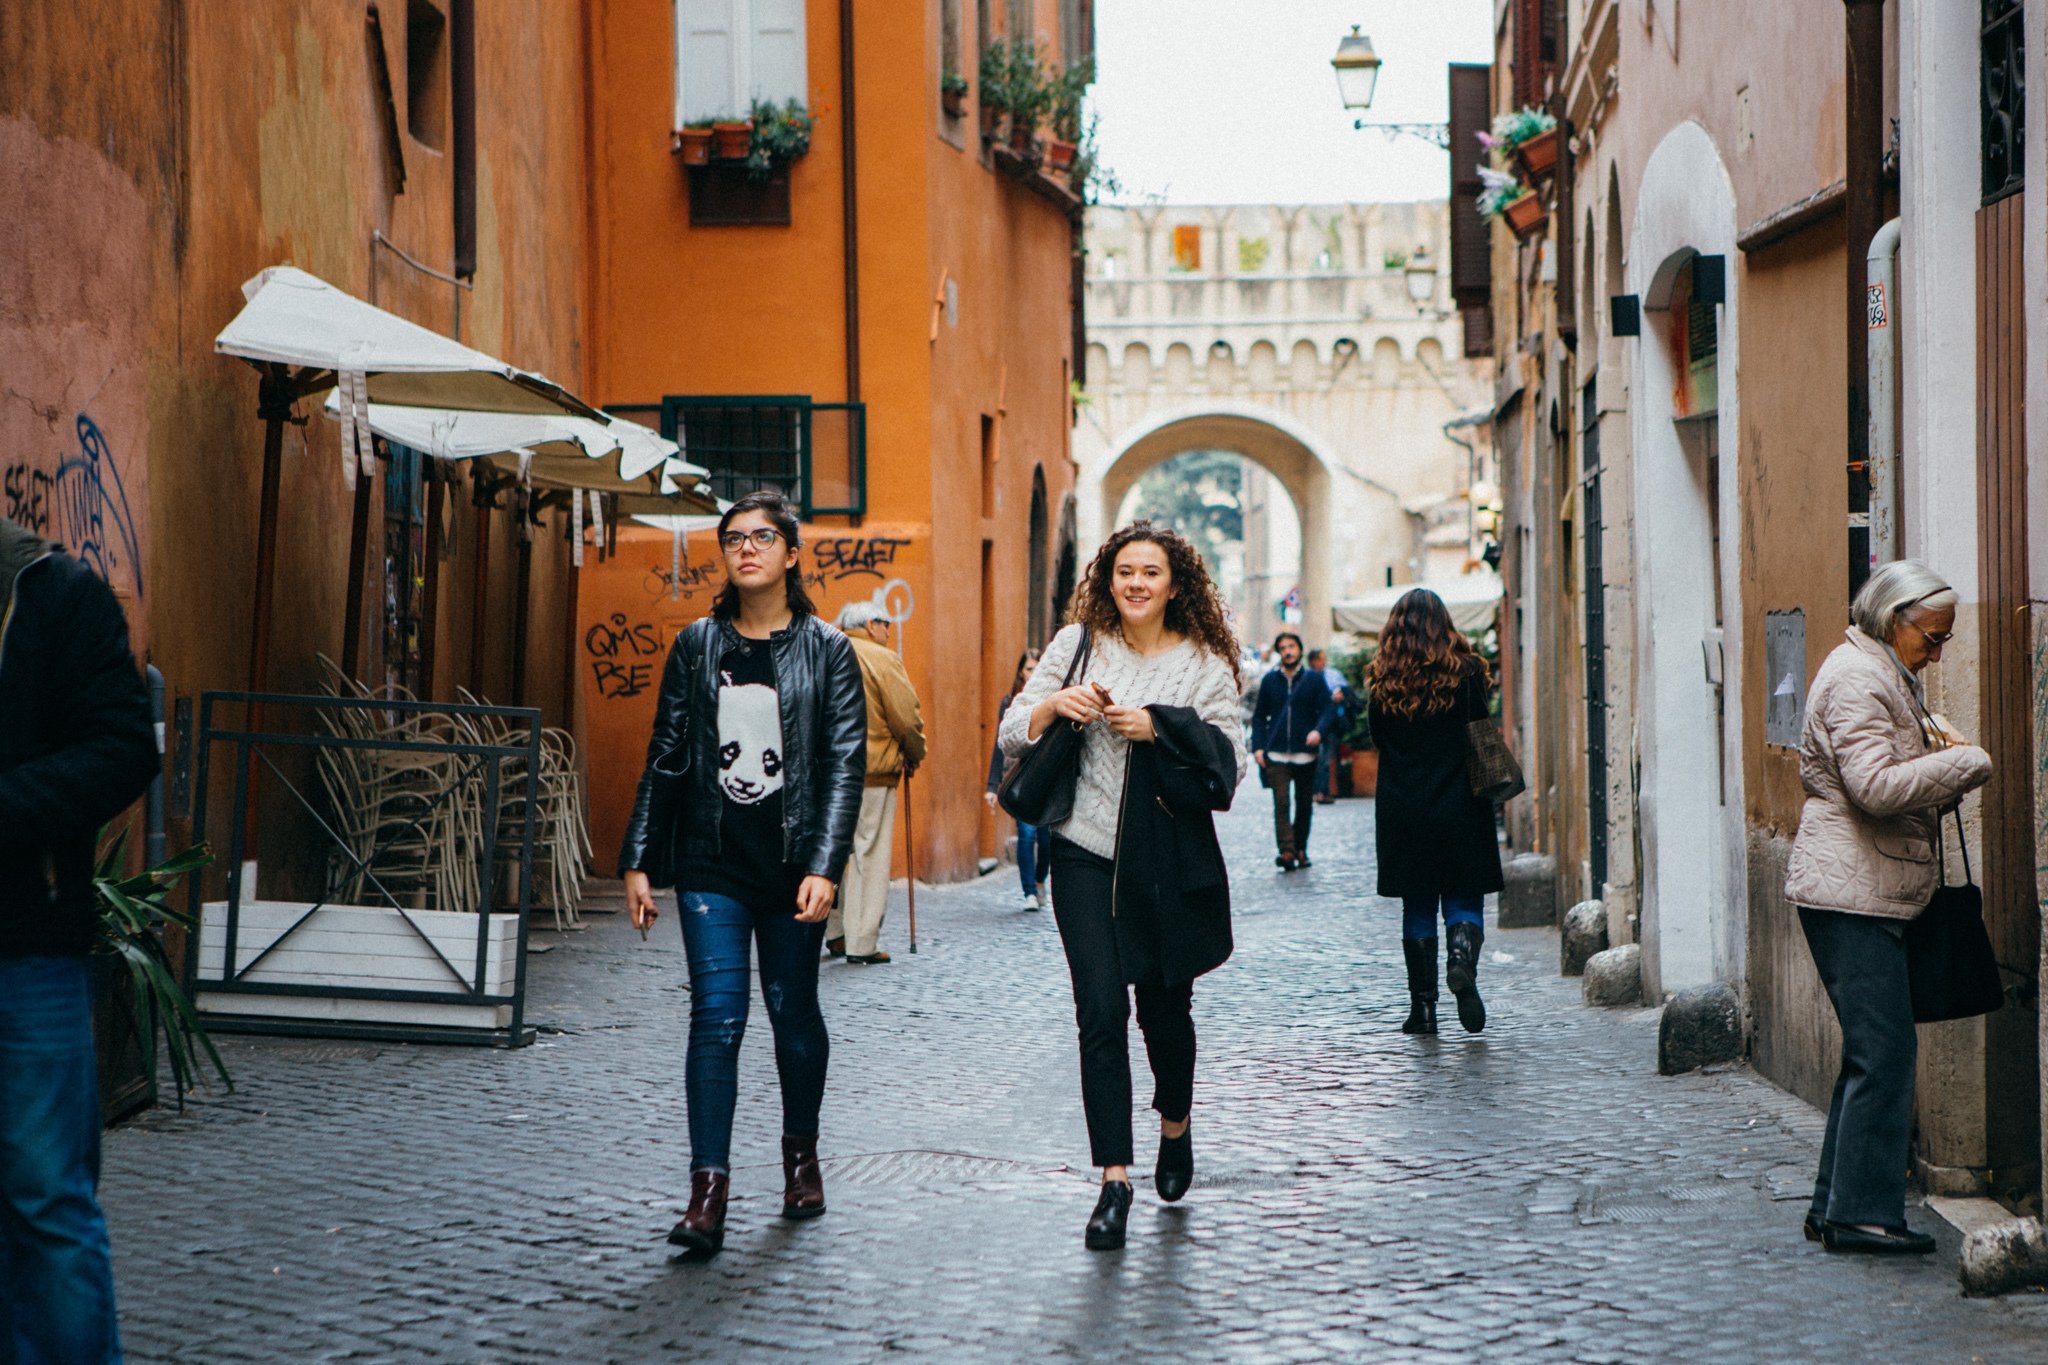 June 9 study abroad in Italy